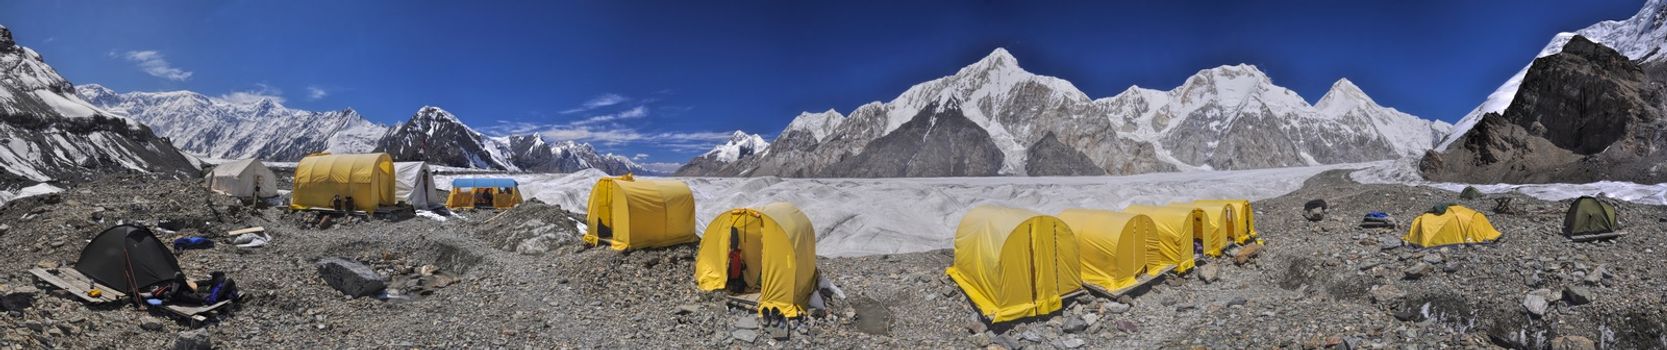 Scenic panorama of tents on Engilchek glacier in picturesque Tian Shan mountain range in Kyrgyzstan